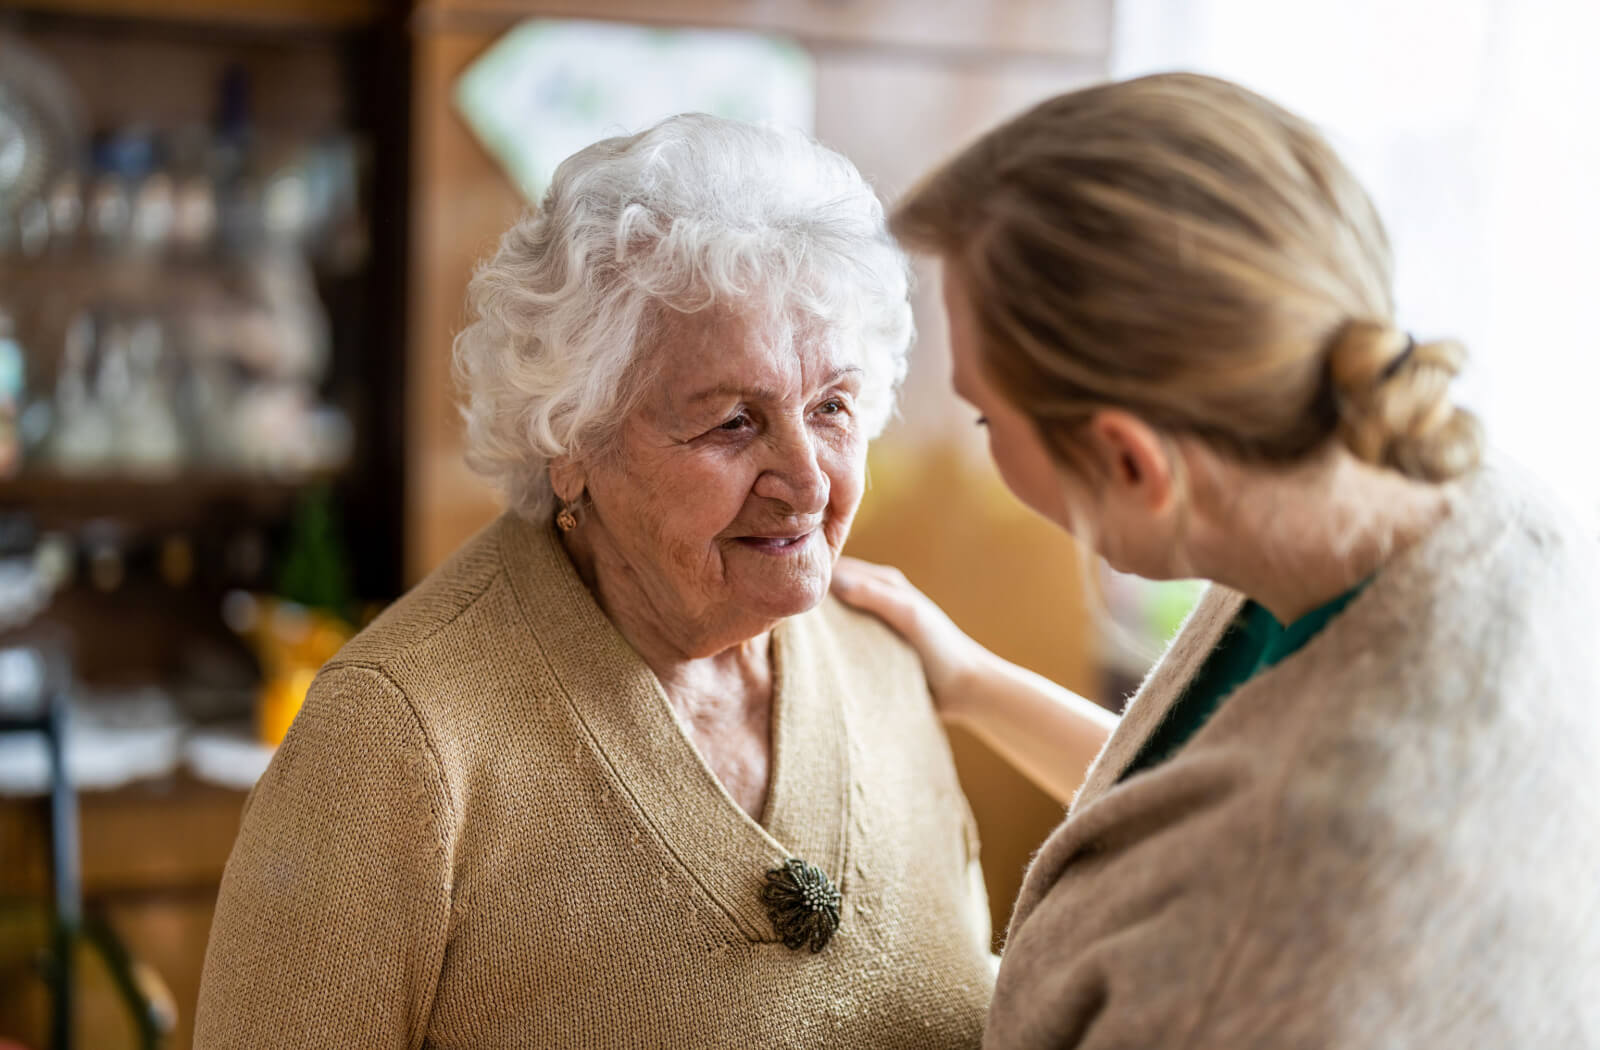 A young caregiver placing her hand on a senior woman's shoulder as she assists her in her day-to-day activities